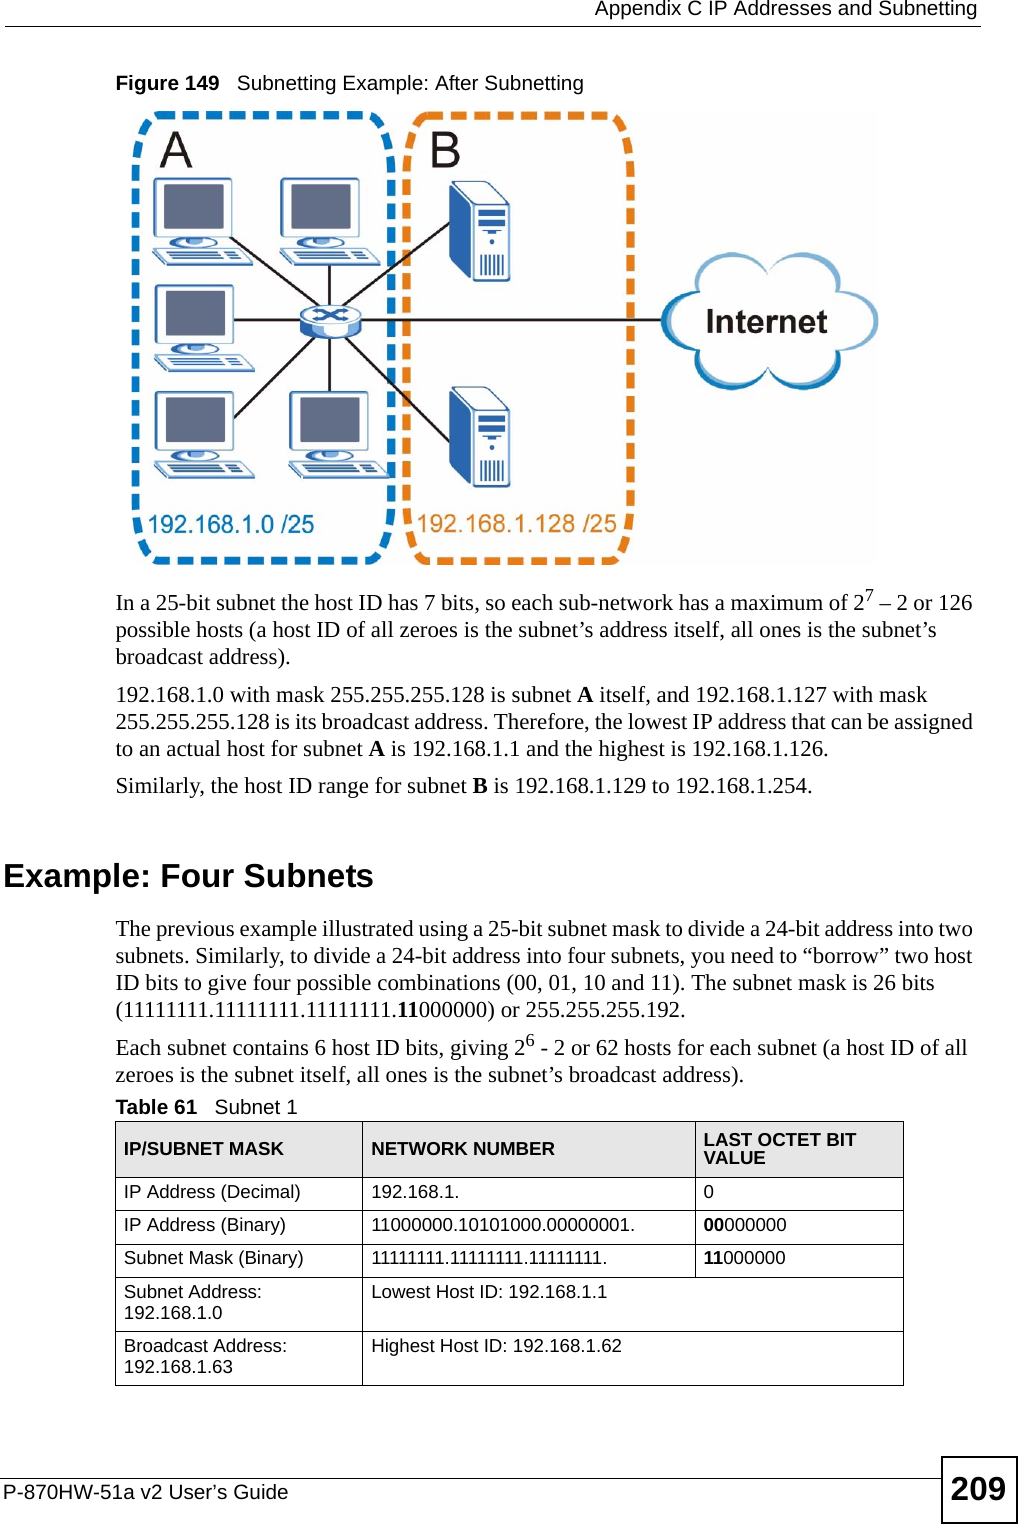  Appendix C IP Addresses and SubnettingP-870HW-51a v2 User’s Guide 209Figure 149   Subnetting Example: After SubnettingIn a 25-bit subnet the host ID has 7 bits, so each sub-network has a maximum of 27 – 2 or 126 possible hosts (a host ID of all zeroes is the subnet’s address itself, all ones is the subnet’s broadcast address).192.168.1.0 with mask 255.255.255.128 is subnet A itself, and 192.168.1.127 with mask 255.255.255.128 is its broadcast address. Therefore, the lowest IP address that can be assigned to an actual host for subnet A is 192.168.1.1 and the highest is 192.168.1.126. Similarly, the host ID range for subnet B is 192.168.1.129 to 192.168.1.254.Example: Four Subnets The previous example illustrated using a 25-bit subnet mask to divide a 24-bit address into two subnets. Similarly, to divide a 24-bit address into four subnets, you need to “borrow” two host ID bits to give four possible combinations (00, 01, 10 and 11). The subnet mask is 26 bits (11111111.11111111.11111111.11000000) or 255.255.255.192. Each subnet contains 6 host ID bits, giving 26 - 2 or 62 hosts for each subnet (a host ID of all zeroes is the subnet itself, all ones is the subnet’s broadcast address). Table 61   Subnet 1IP/SUBNET MASK NETWORK NUMBER LAST OCTET BIT VALUEIP Address (Decimal) 192.168.1. 0IP Address (Binary) 11000000.10101000.00000001. 00000000Subnet Mask (Binary) 11111111.11111111.11111111. 11000000Subnet Address: 192.168.1.0 Lowest Host ID: 192.168.1.1Broadcast Address: 192.168.1.63 Highest Host ID: 192.168.1.62